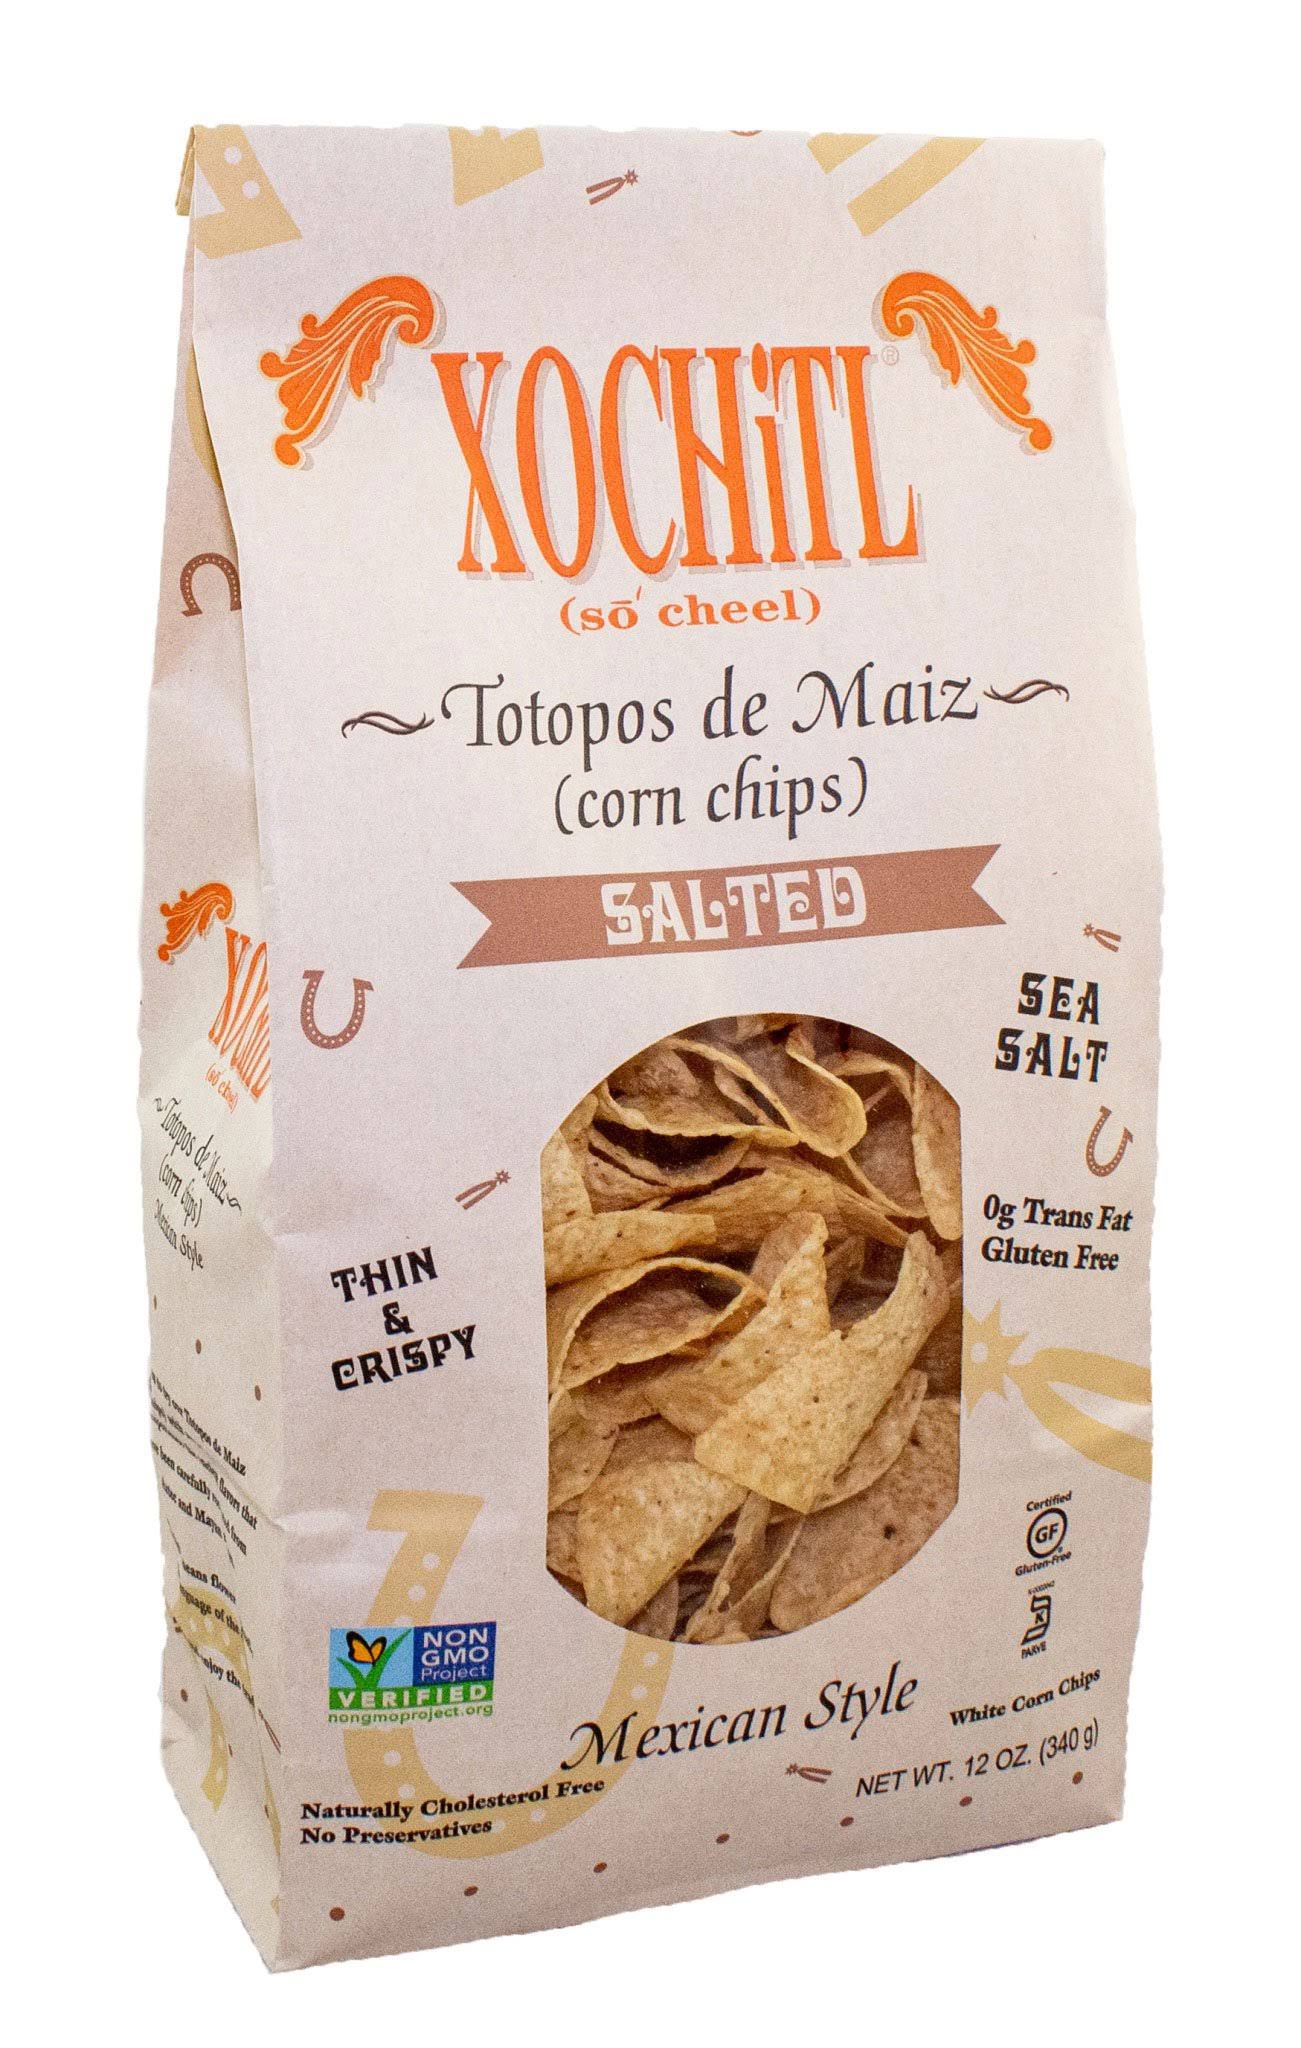 Xochitl: Corn Chips Salted Mexican Style, 16 oz